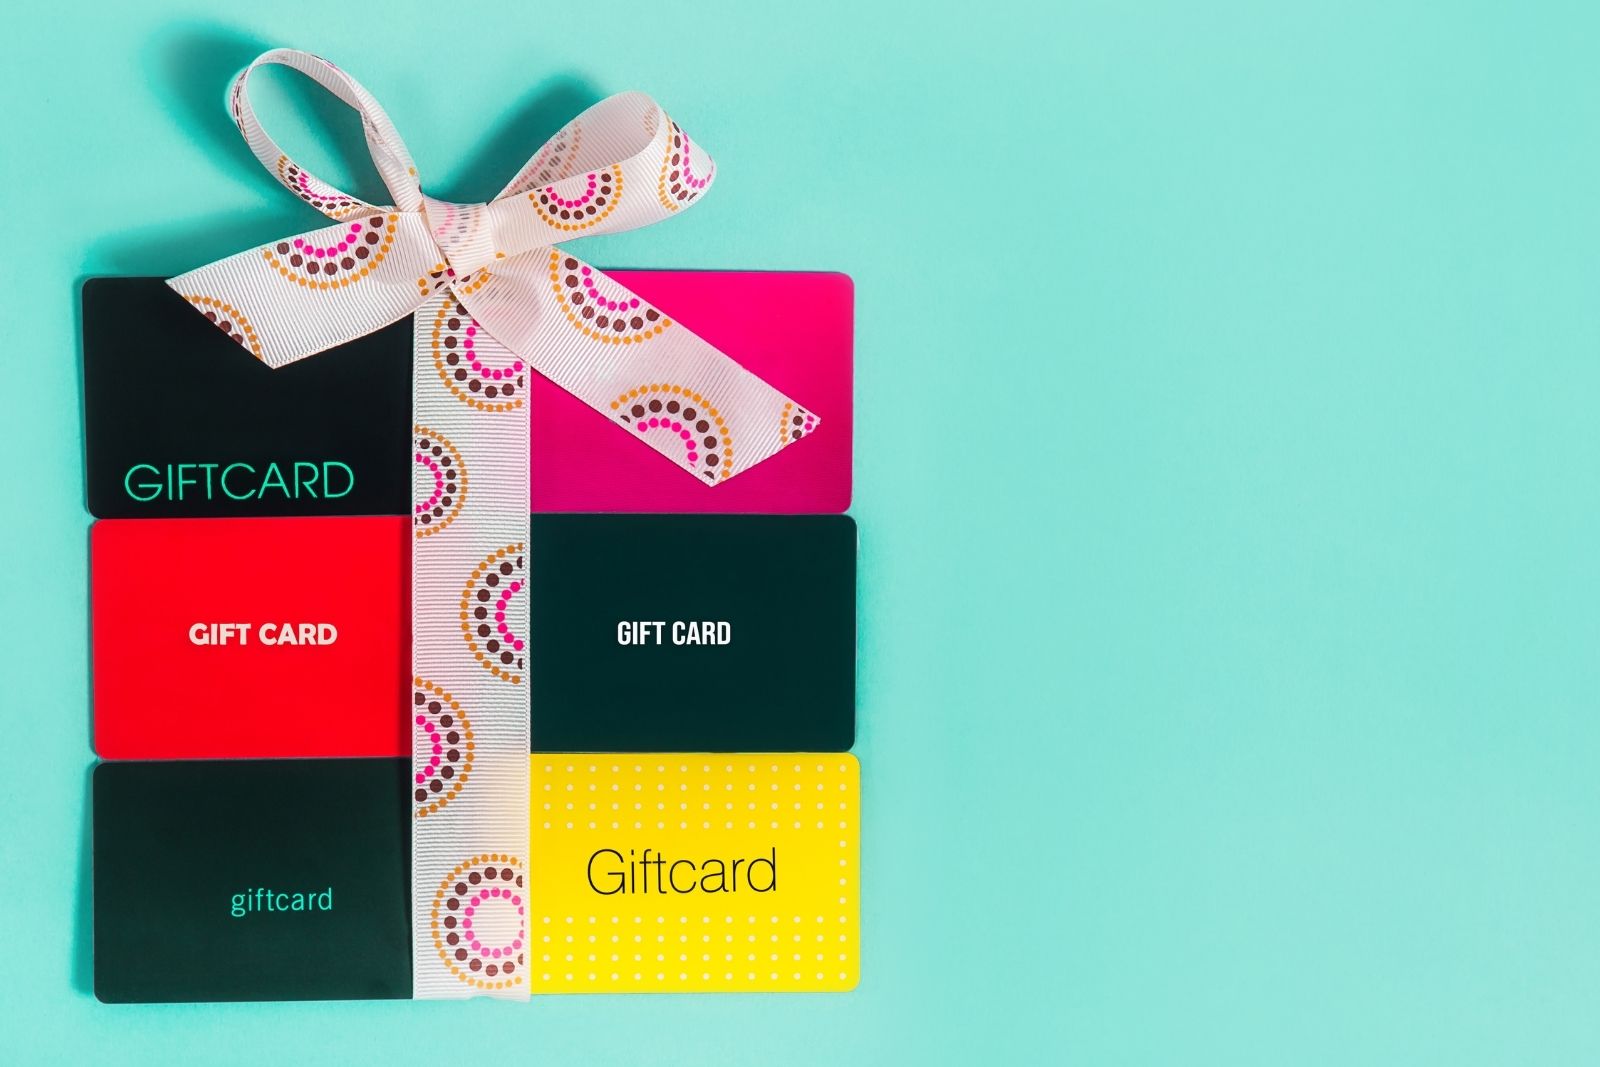 Gift cards laid out with decorative ribbon tied around them